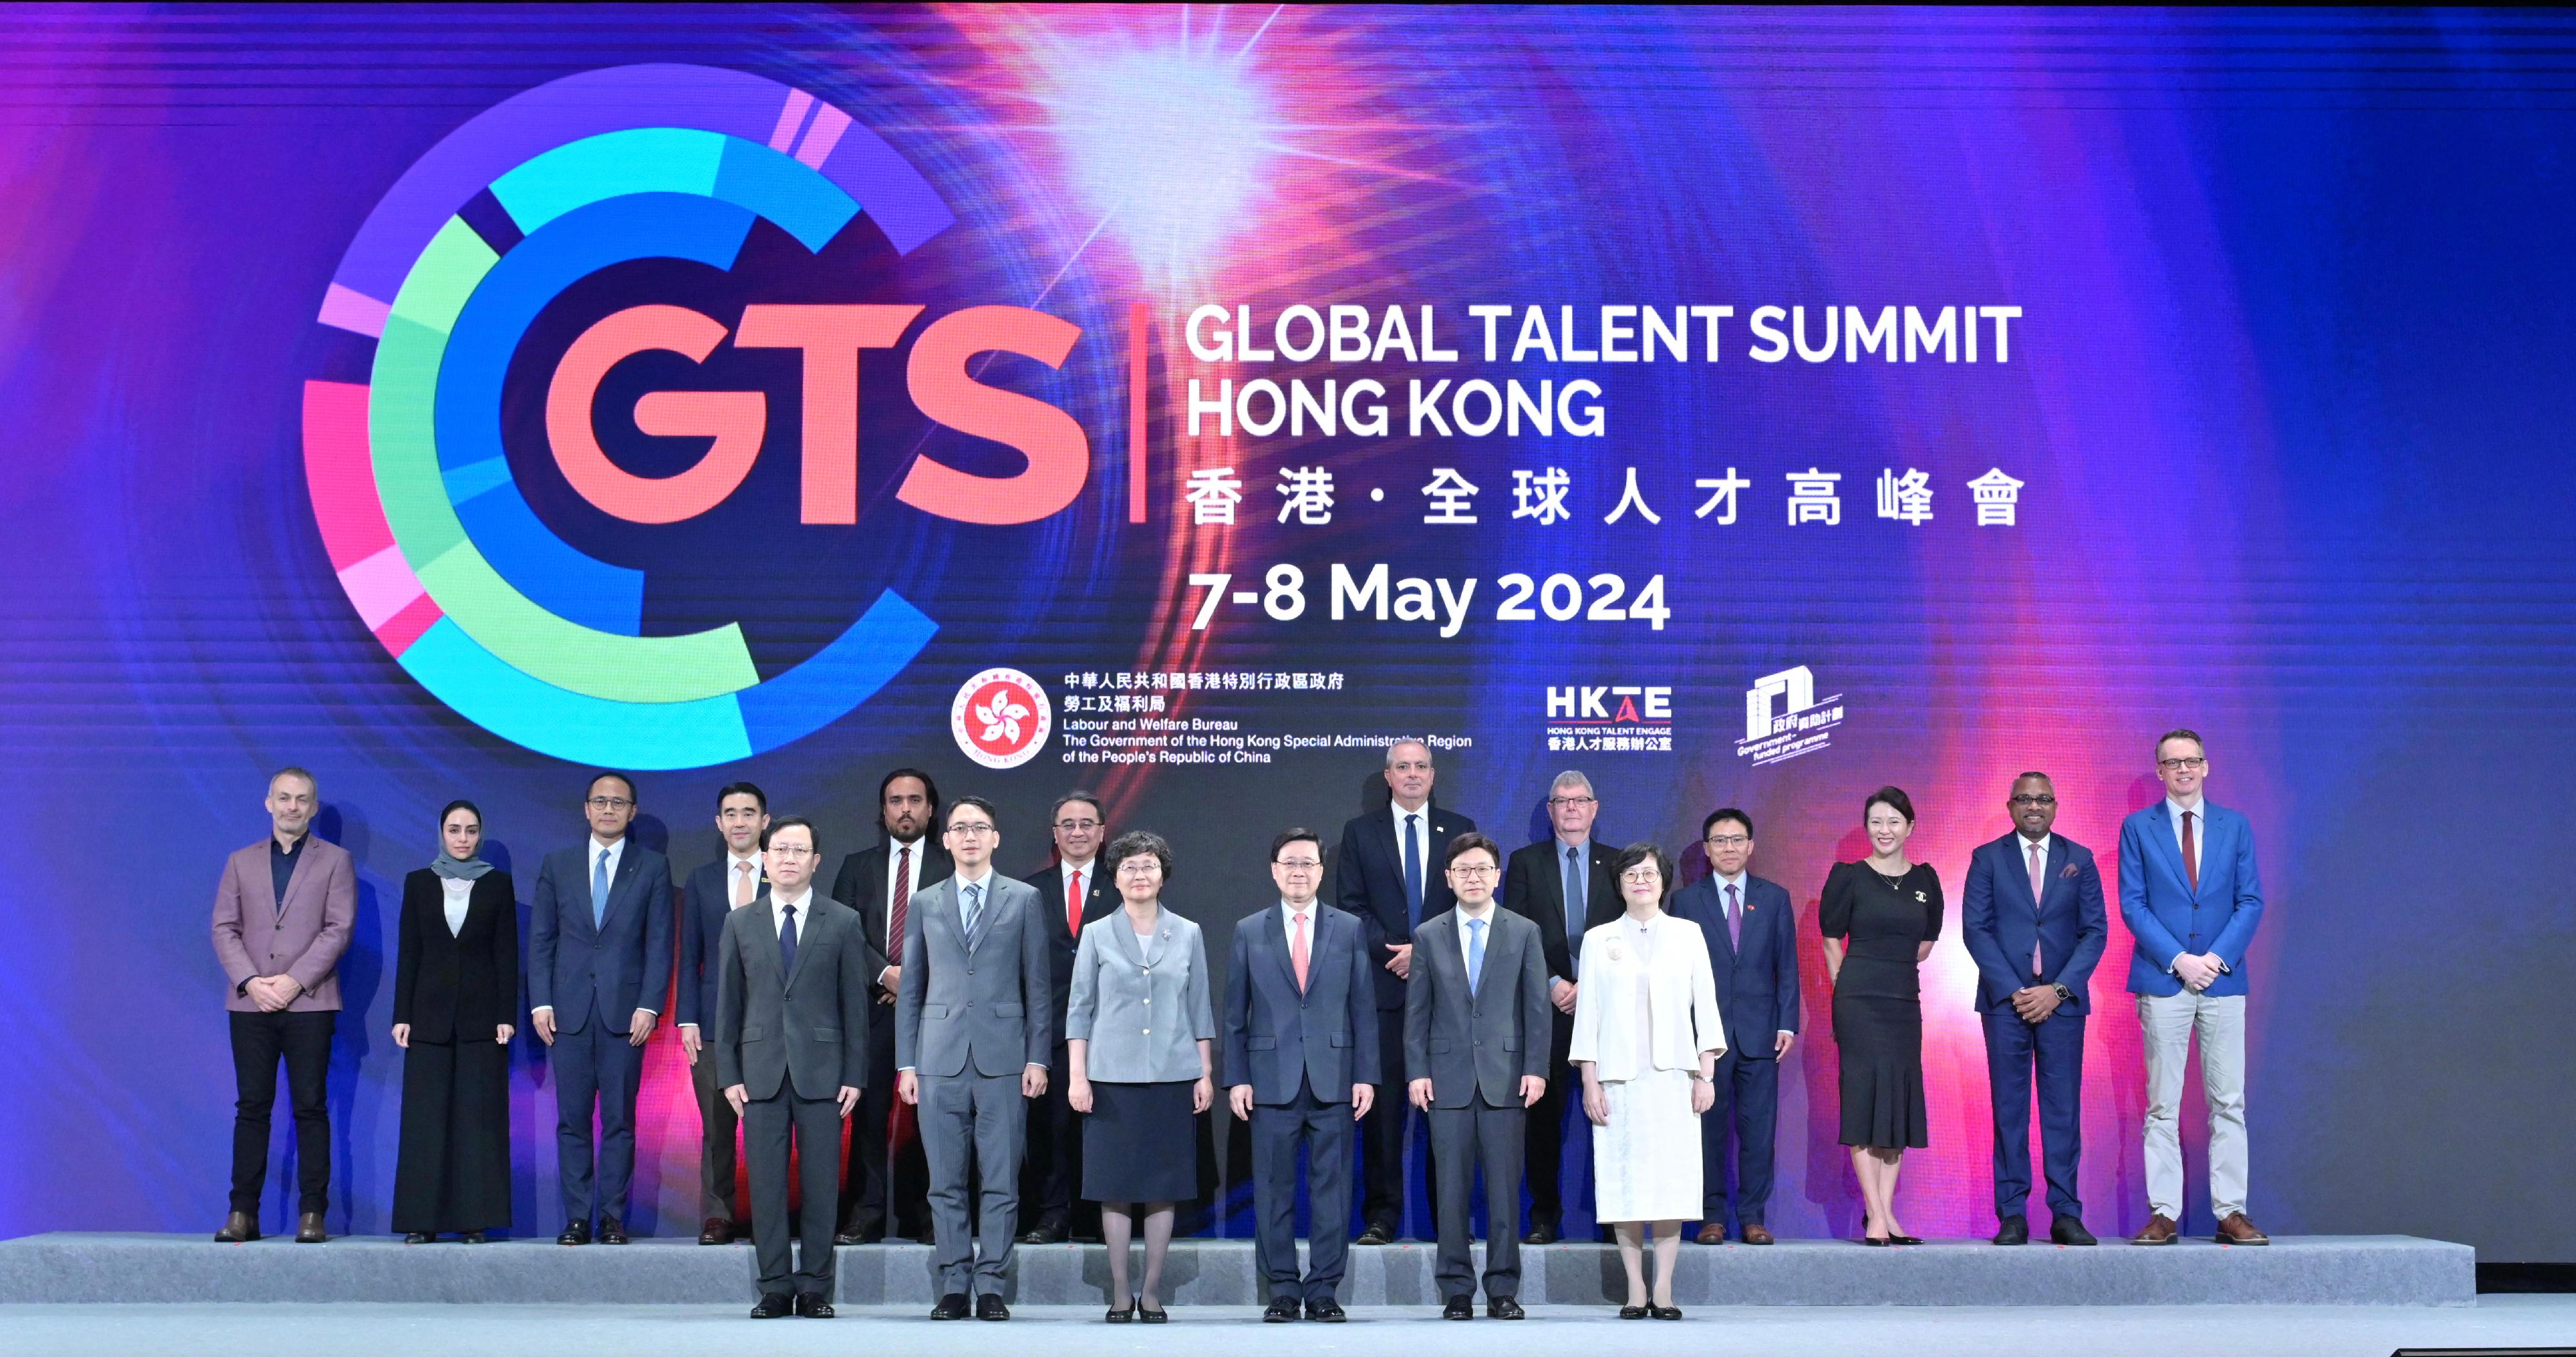 The Chief Executive, Mr John Lee, attended the Global Talent Summit · Hong Kong today (May 7). Photo shows (front row, from left) the Director-General of the Human Resources and Social Security Department of Guangdong Province, Mr Du Minqi; the Secretary-General of the Talent Development Committee of the Macao Special Administrative Region Government, Mr Chao Chong-hang; the Minister of Human Resources and Social Security, Ms Wang Xiaoping; Mr Lee; the Secretary for Labour and Welfare, Mr Chris Sun; and the Director General of the Hong Kong and Macao Affairs Office of the People’s Government of Guangdong Province, Ms Chen Liwen, with speakers of various sessions.